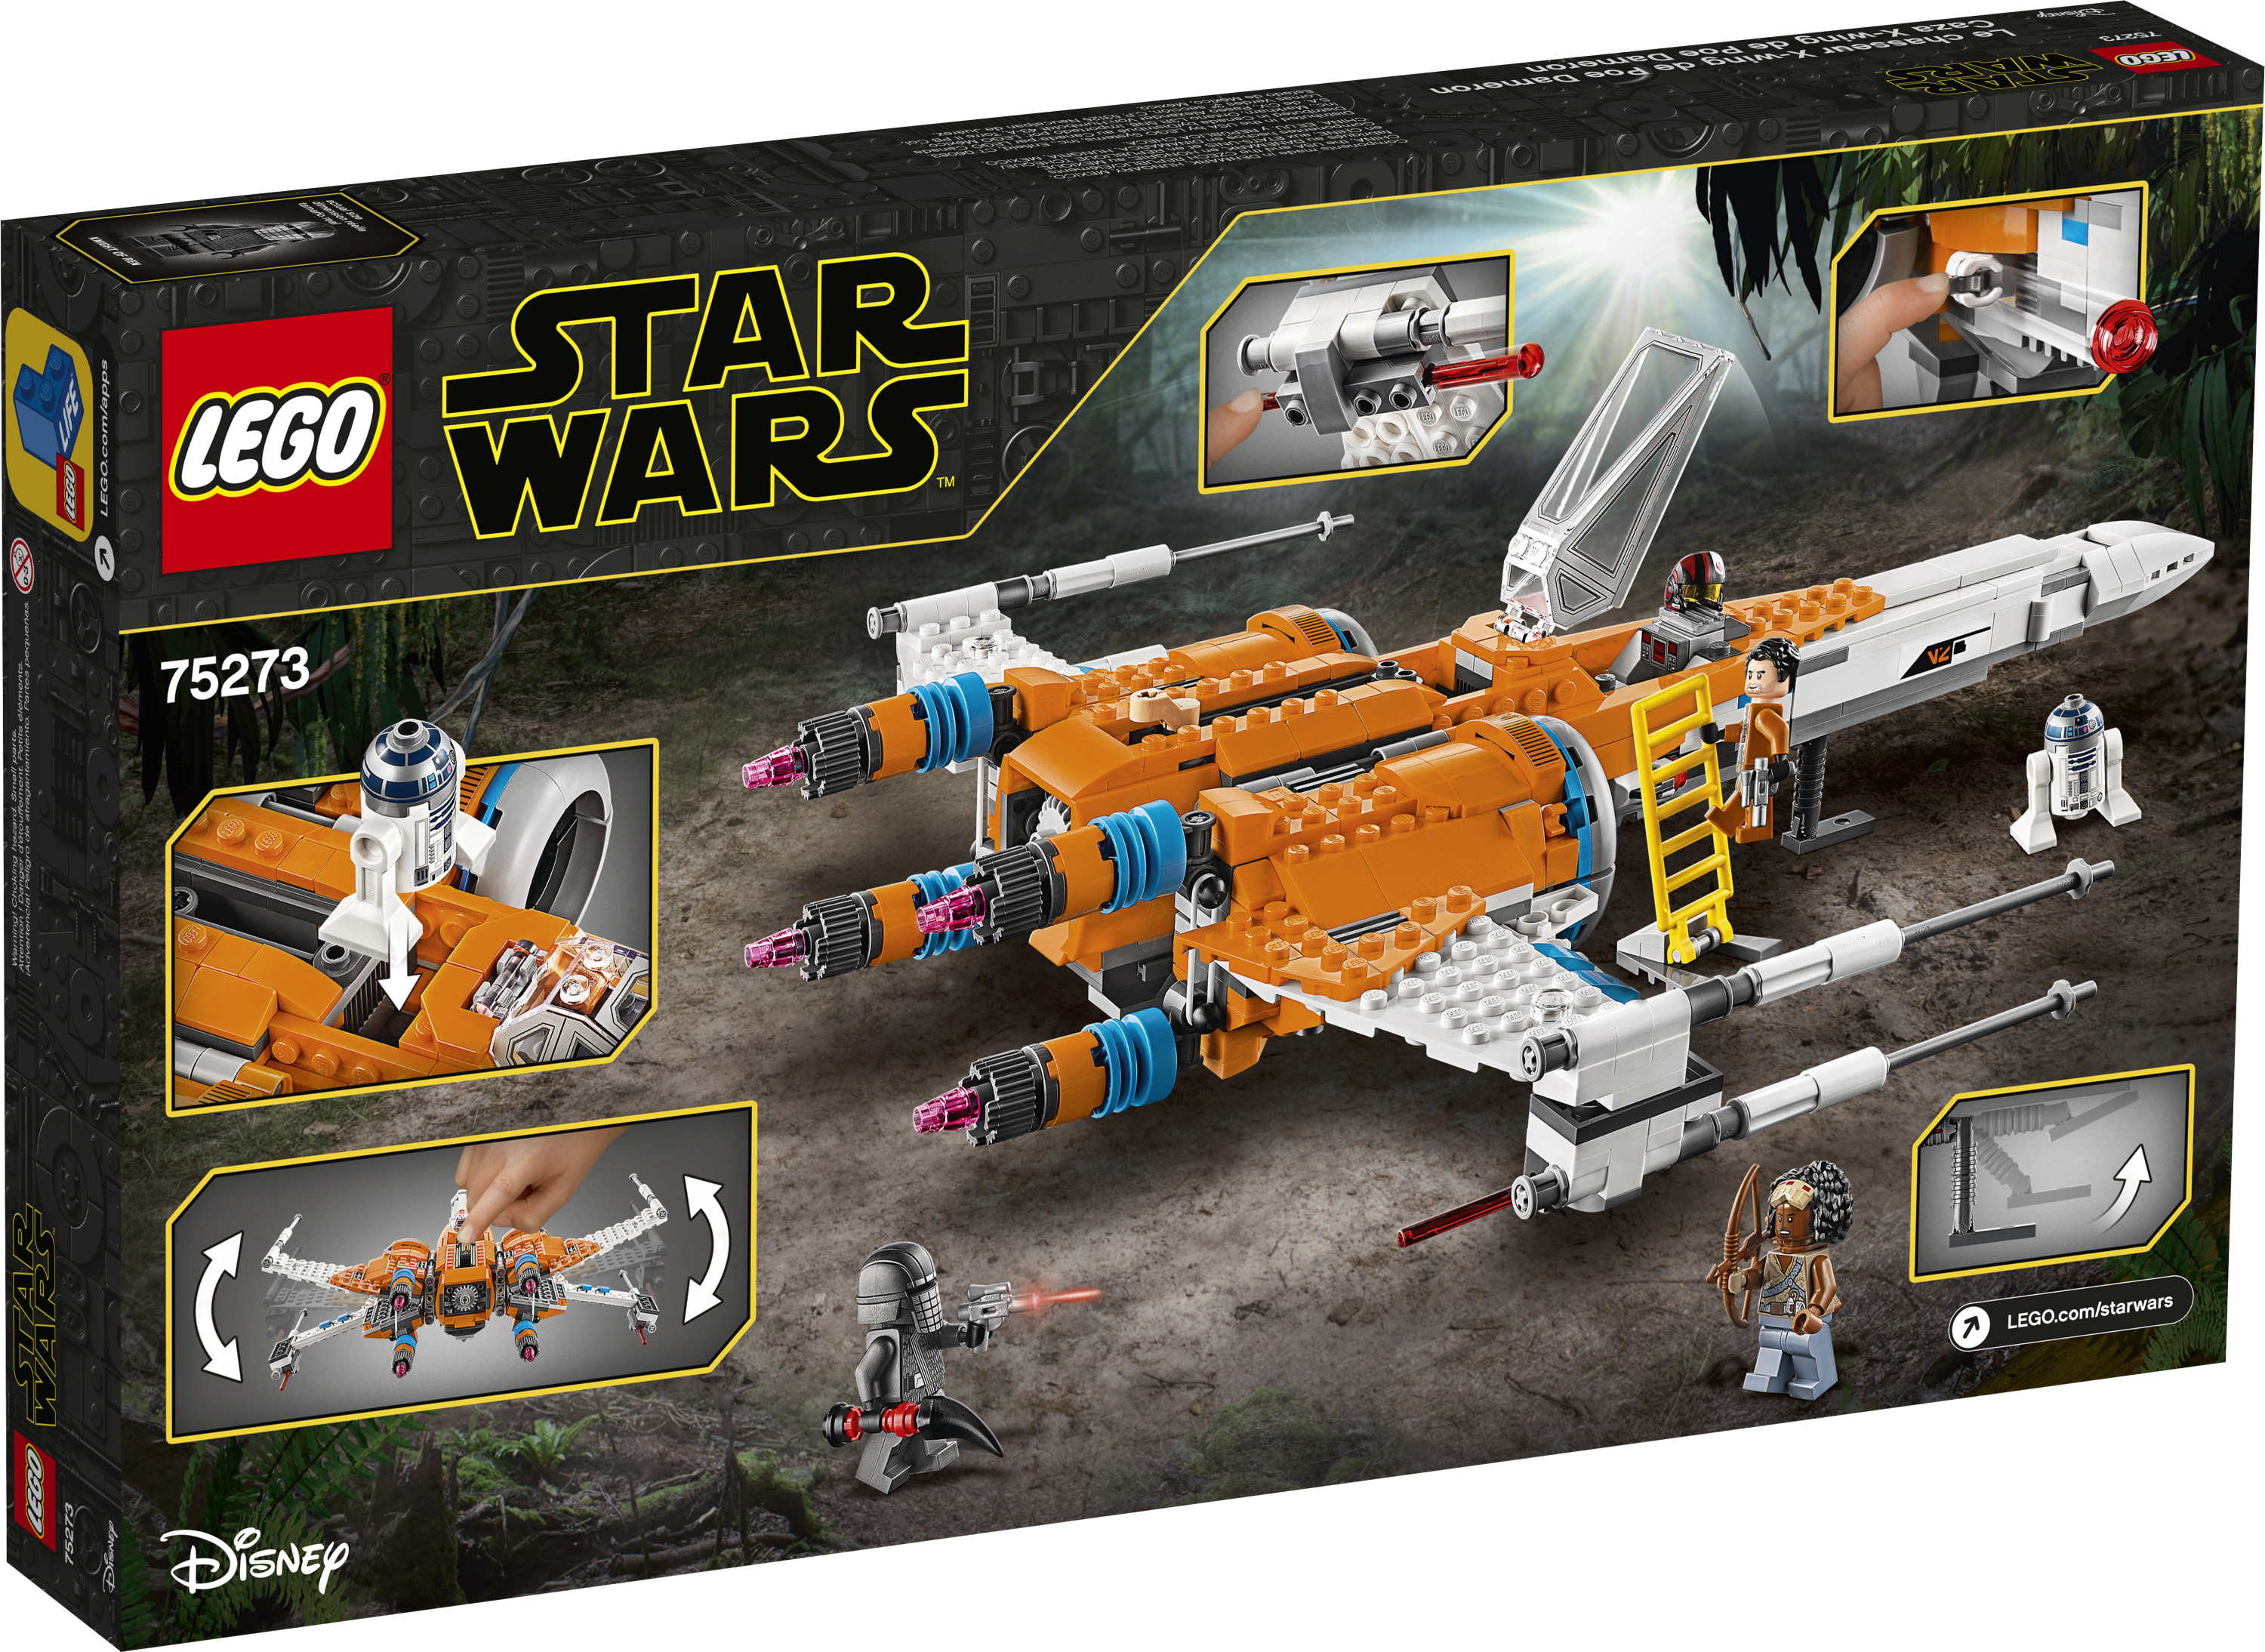 LEGO 75273 Star Wars Poe Dameron's X-wing Fighter Building Kit, 761 Pieces - image 5 of 7